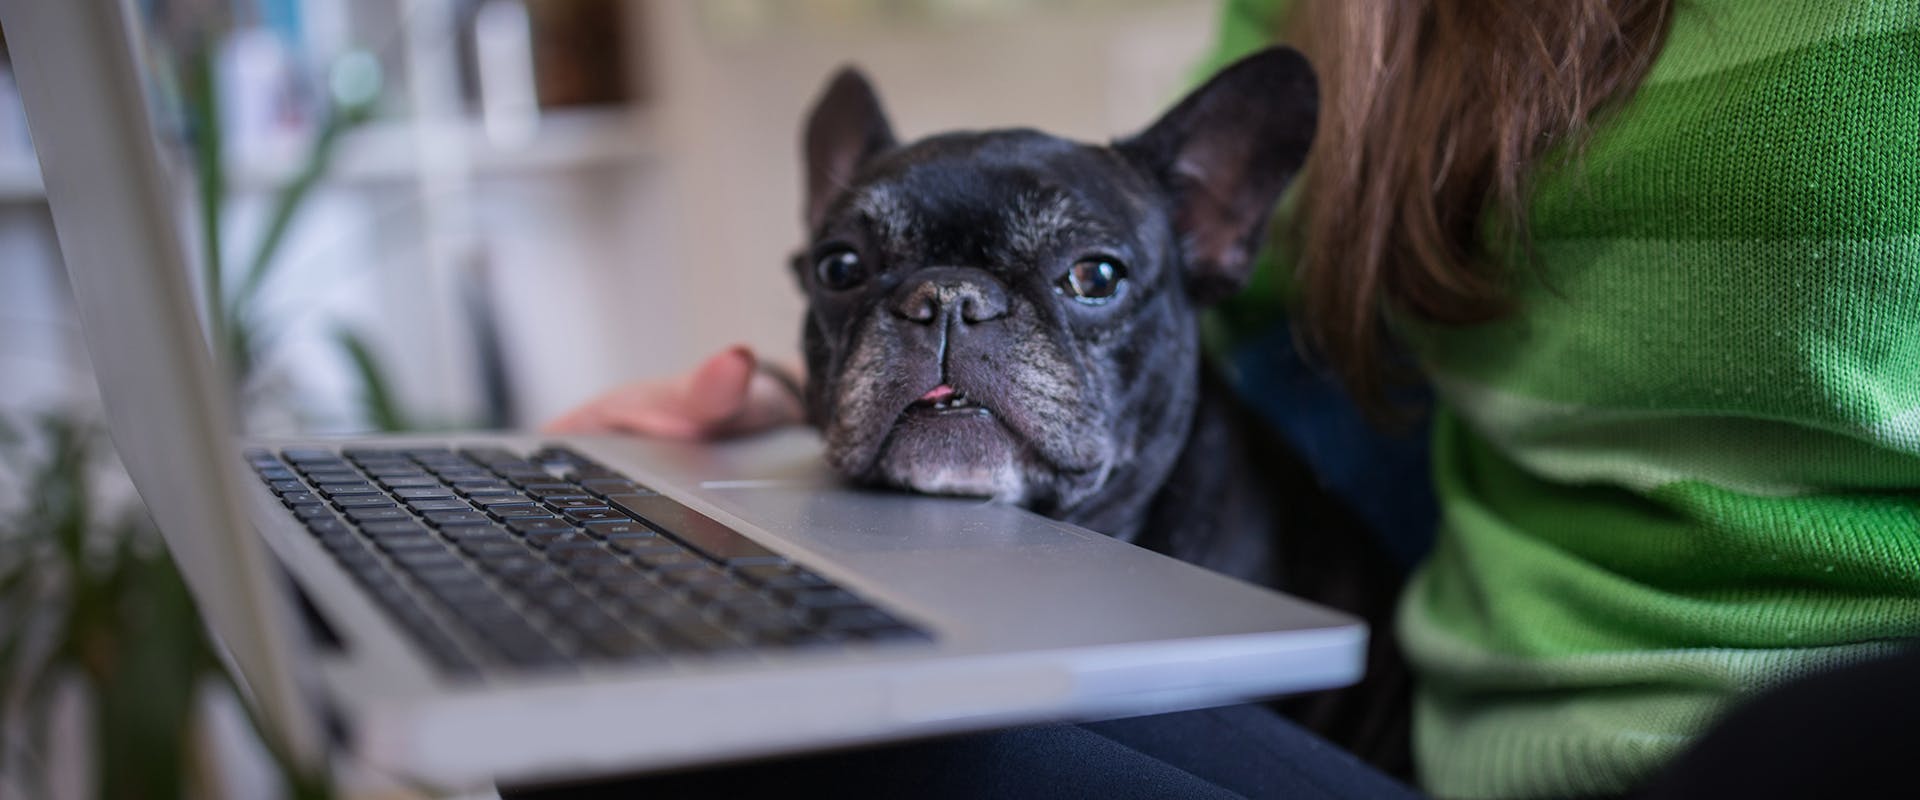 A person sitting in front of a laptop with a small dog on their lap